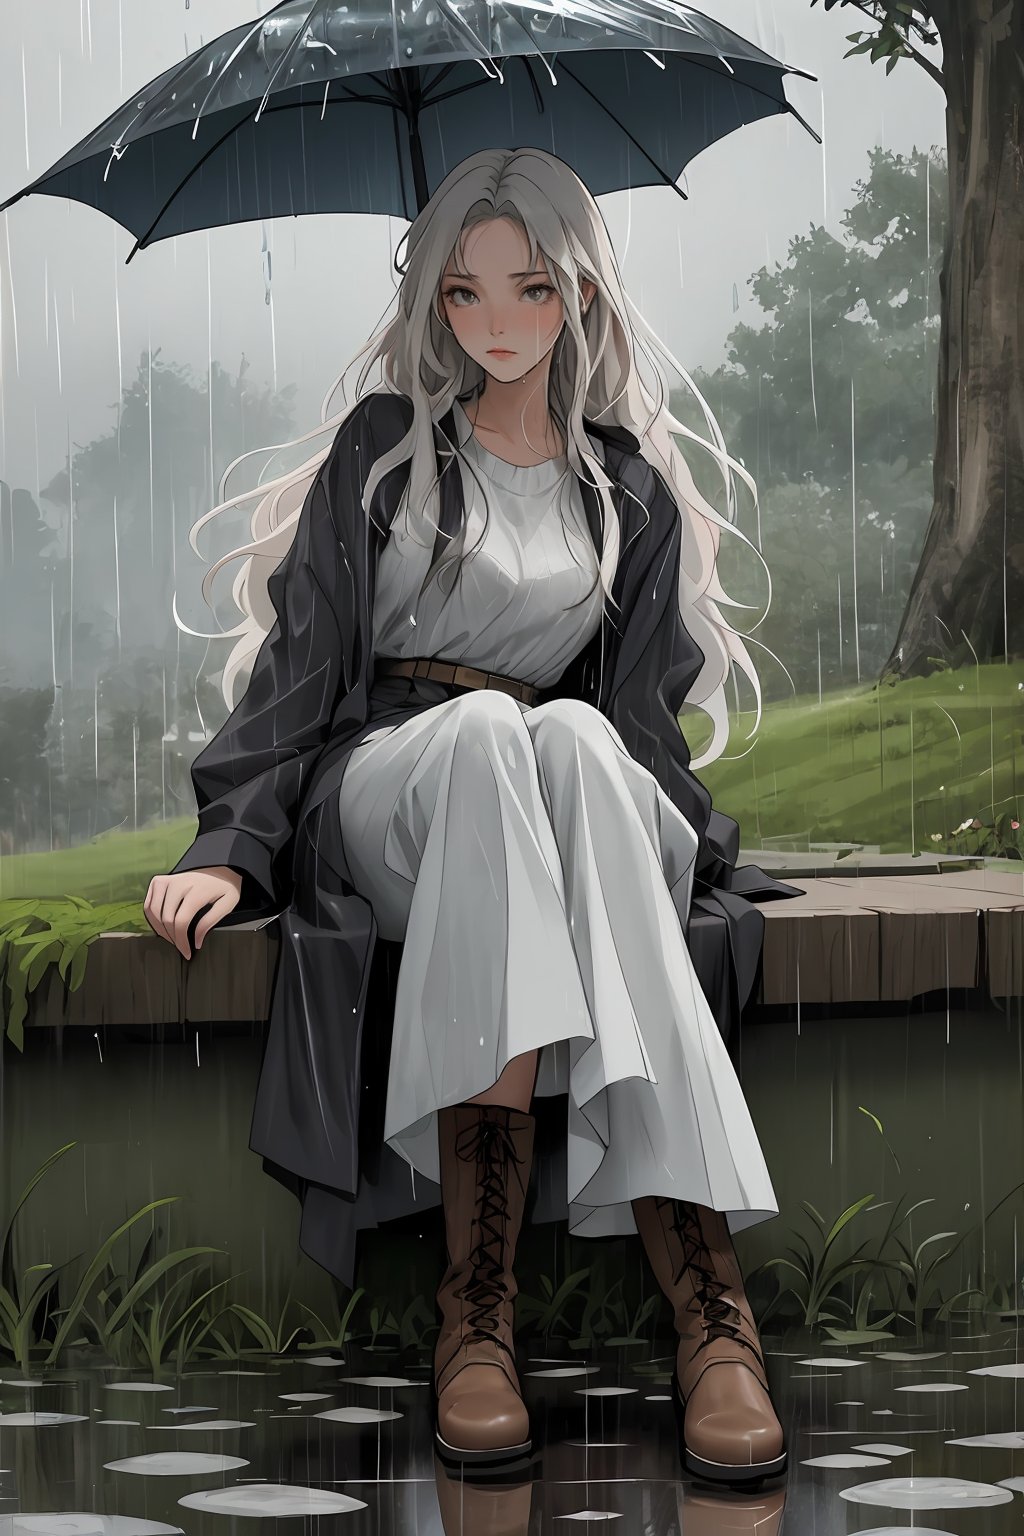 A digital illustration of a melancholic scene with a young woman sitting in the rain, holding a jar labeled 'Memories.' The woman has long, flowing white hair and is dressed in dark, rugged clothing with knee-high boots. She is sitting cross-legged on the wet ground, and the background is dark and rainy, enhancing the somber mood. Her hair and the rain have a dynamic, flowing quality, adding a sense of movement to the image.